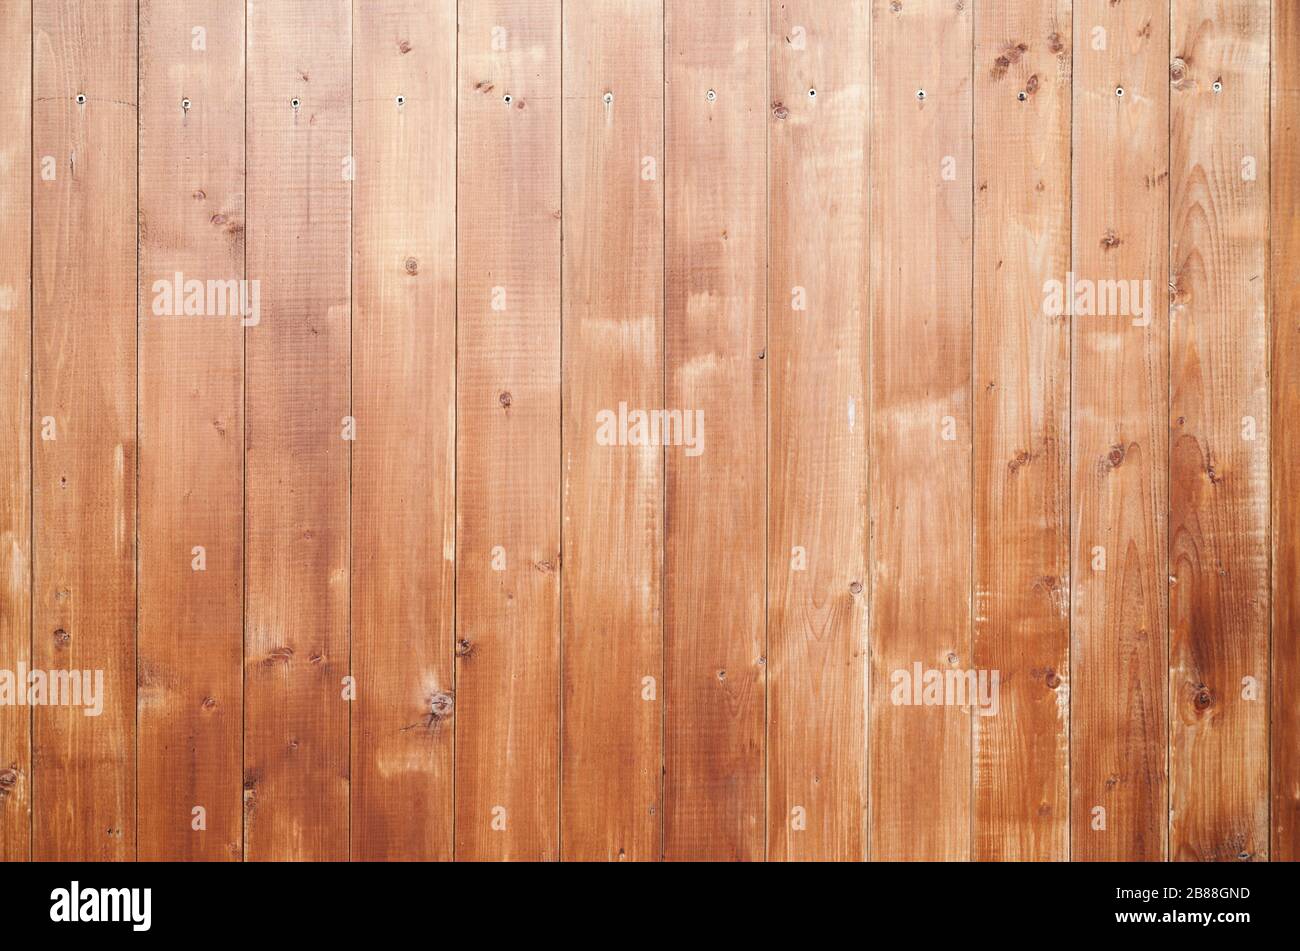 Natural new wooden wall made of toned pine wood planks. Flat background photo texture, frontal view Stock Photo